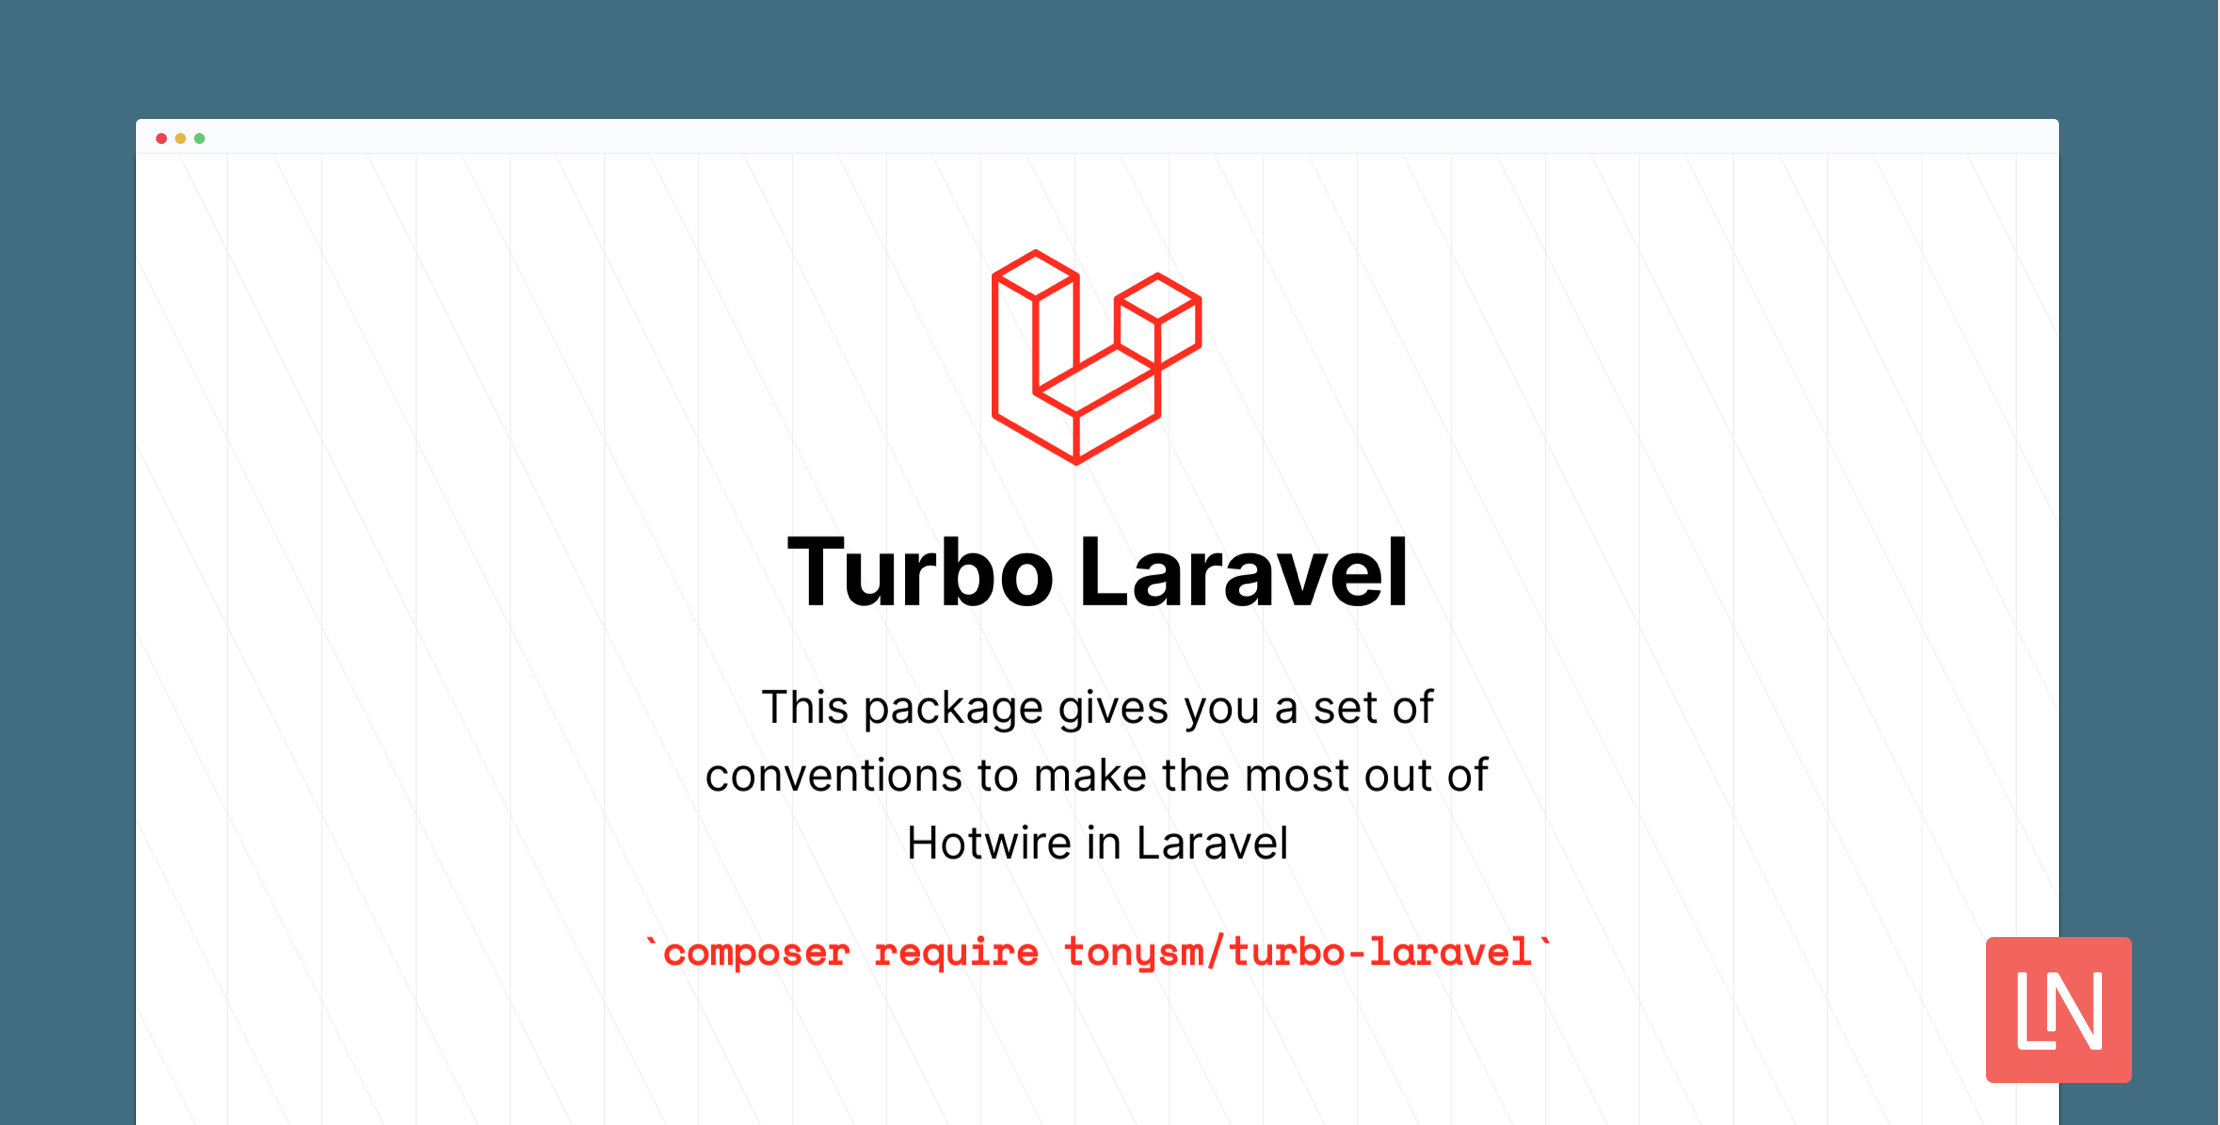 Use Basecamp’s Hotwire in Laravel image